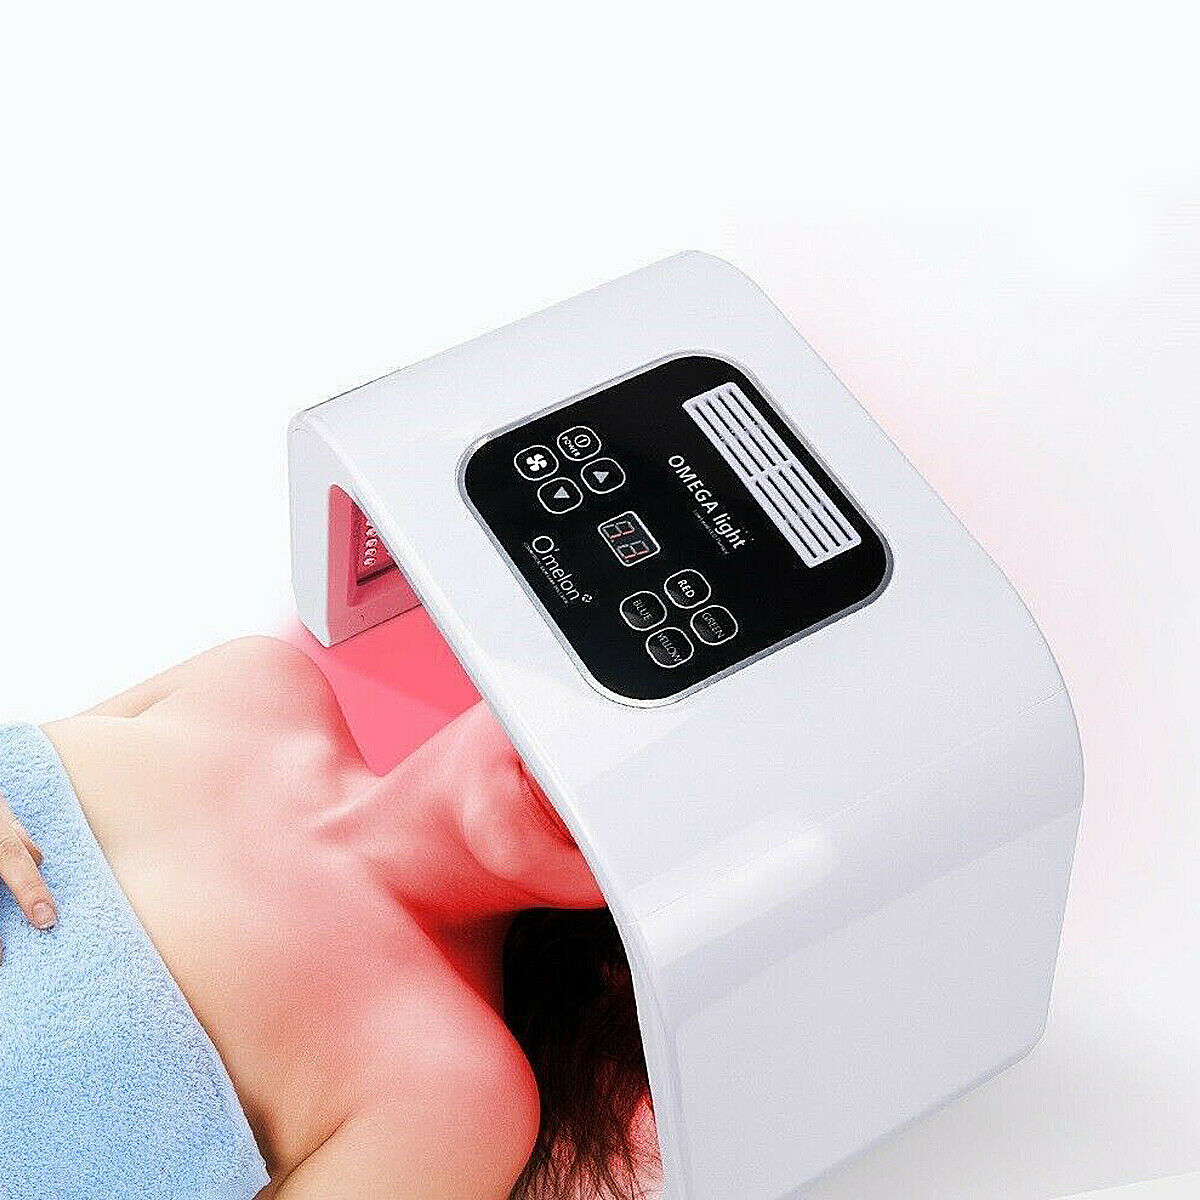 LED Light Therapy Facial Machine - Brody Massage